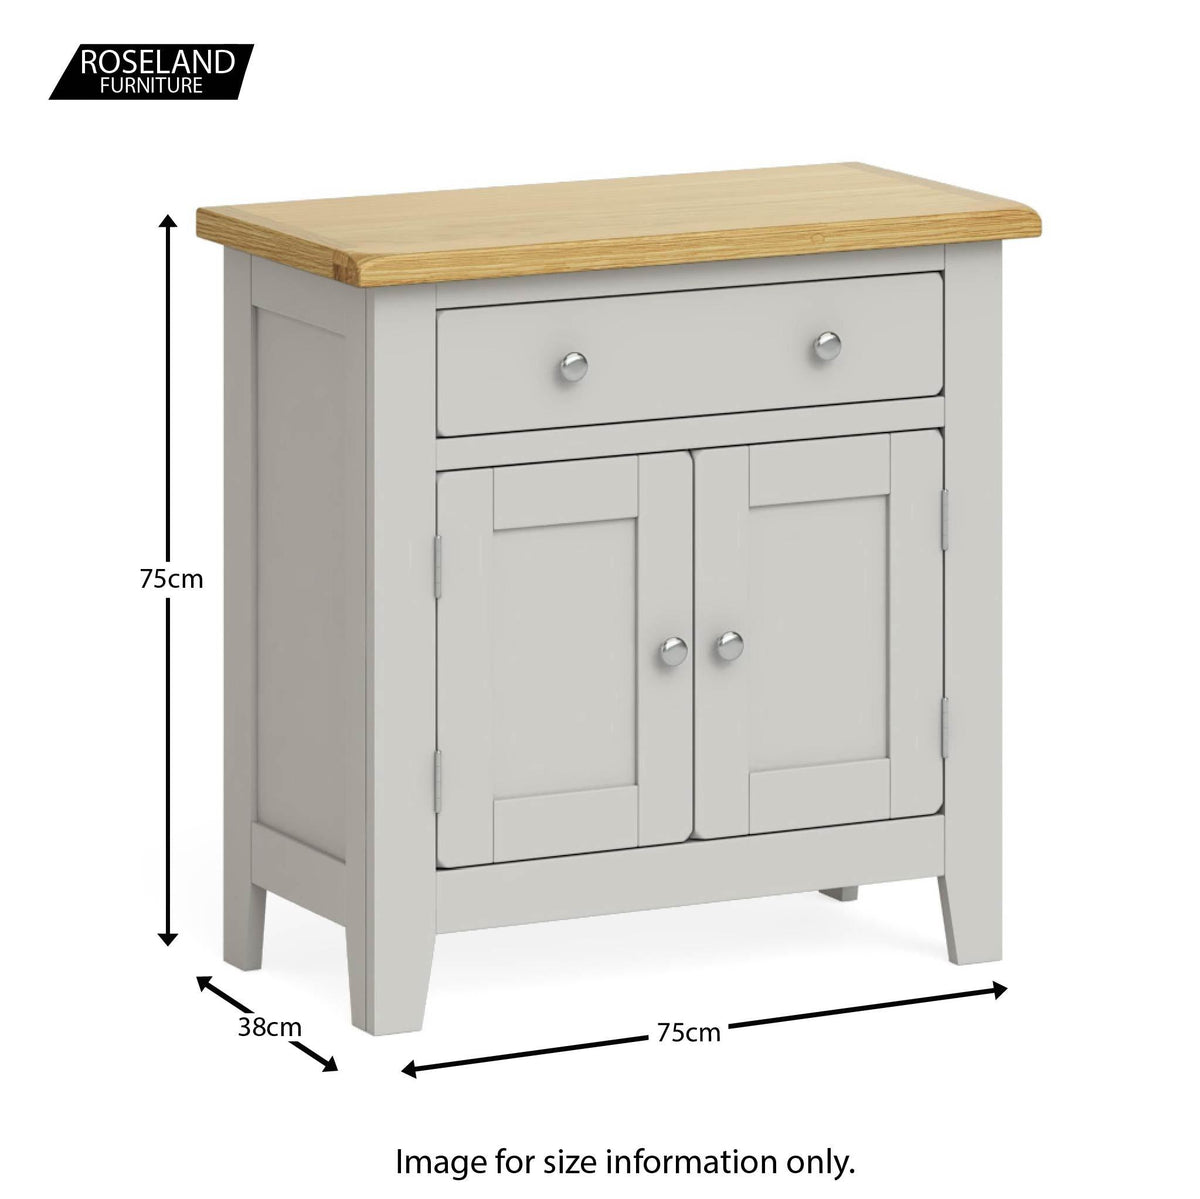 Lundy Grey Mini Sideboard - Size guide